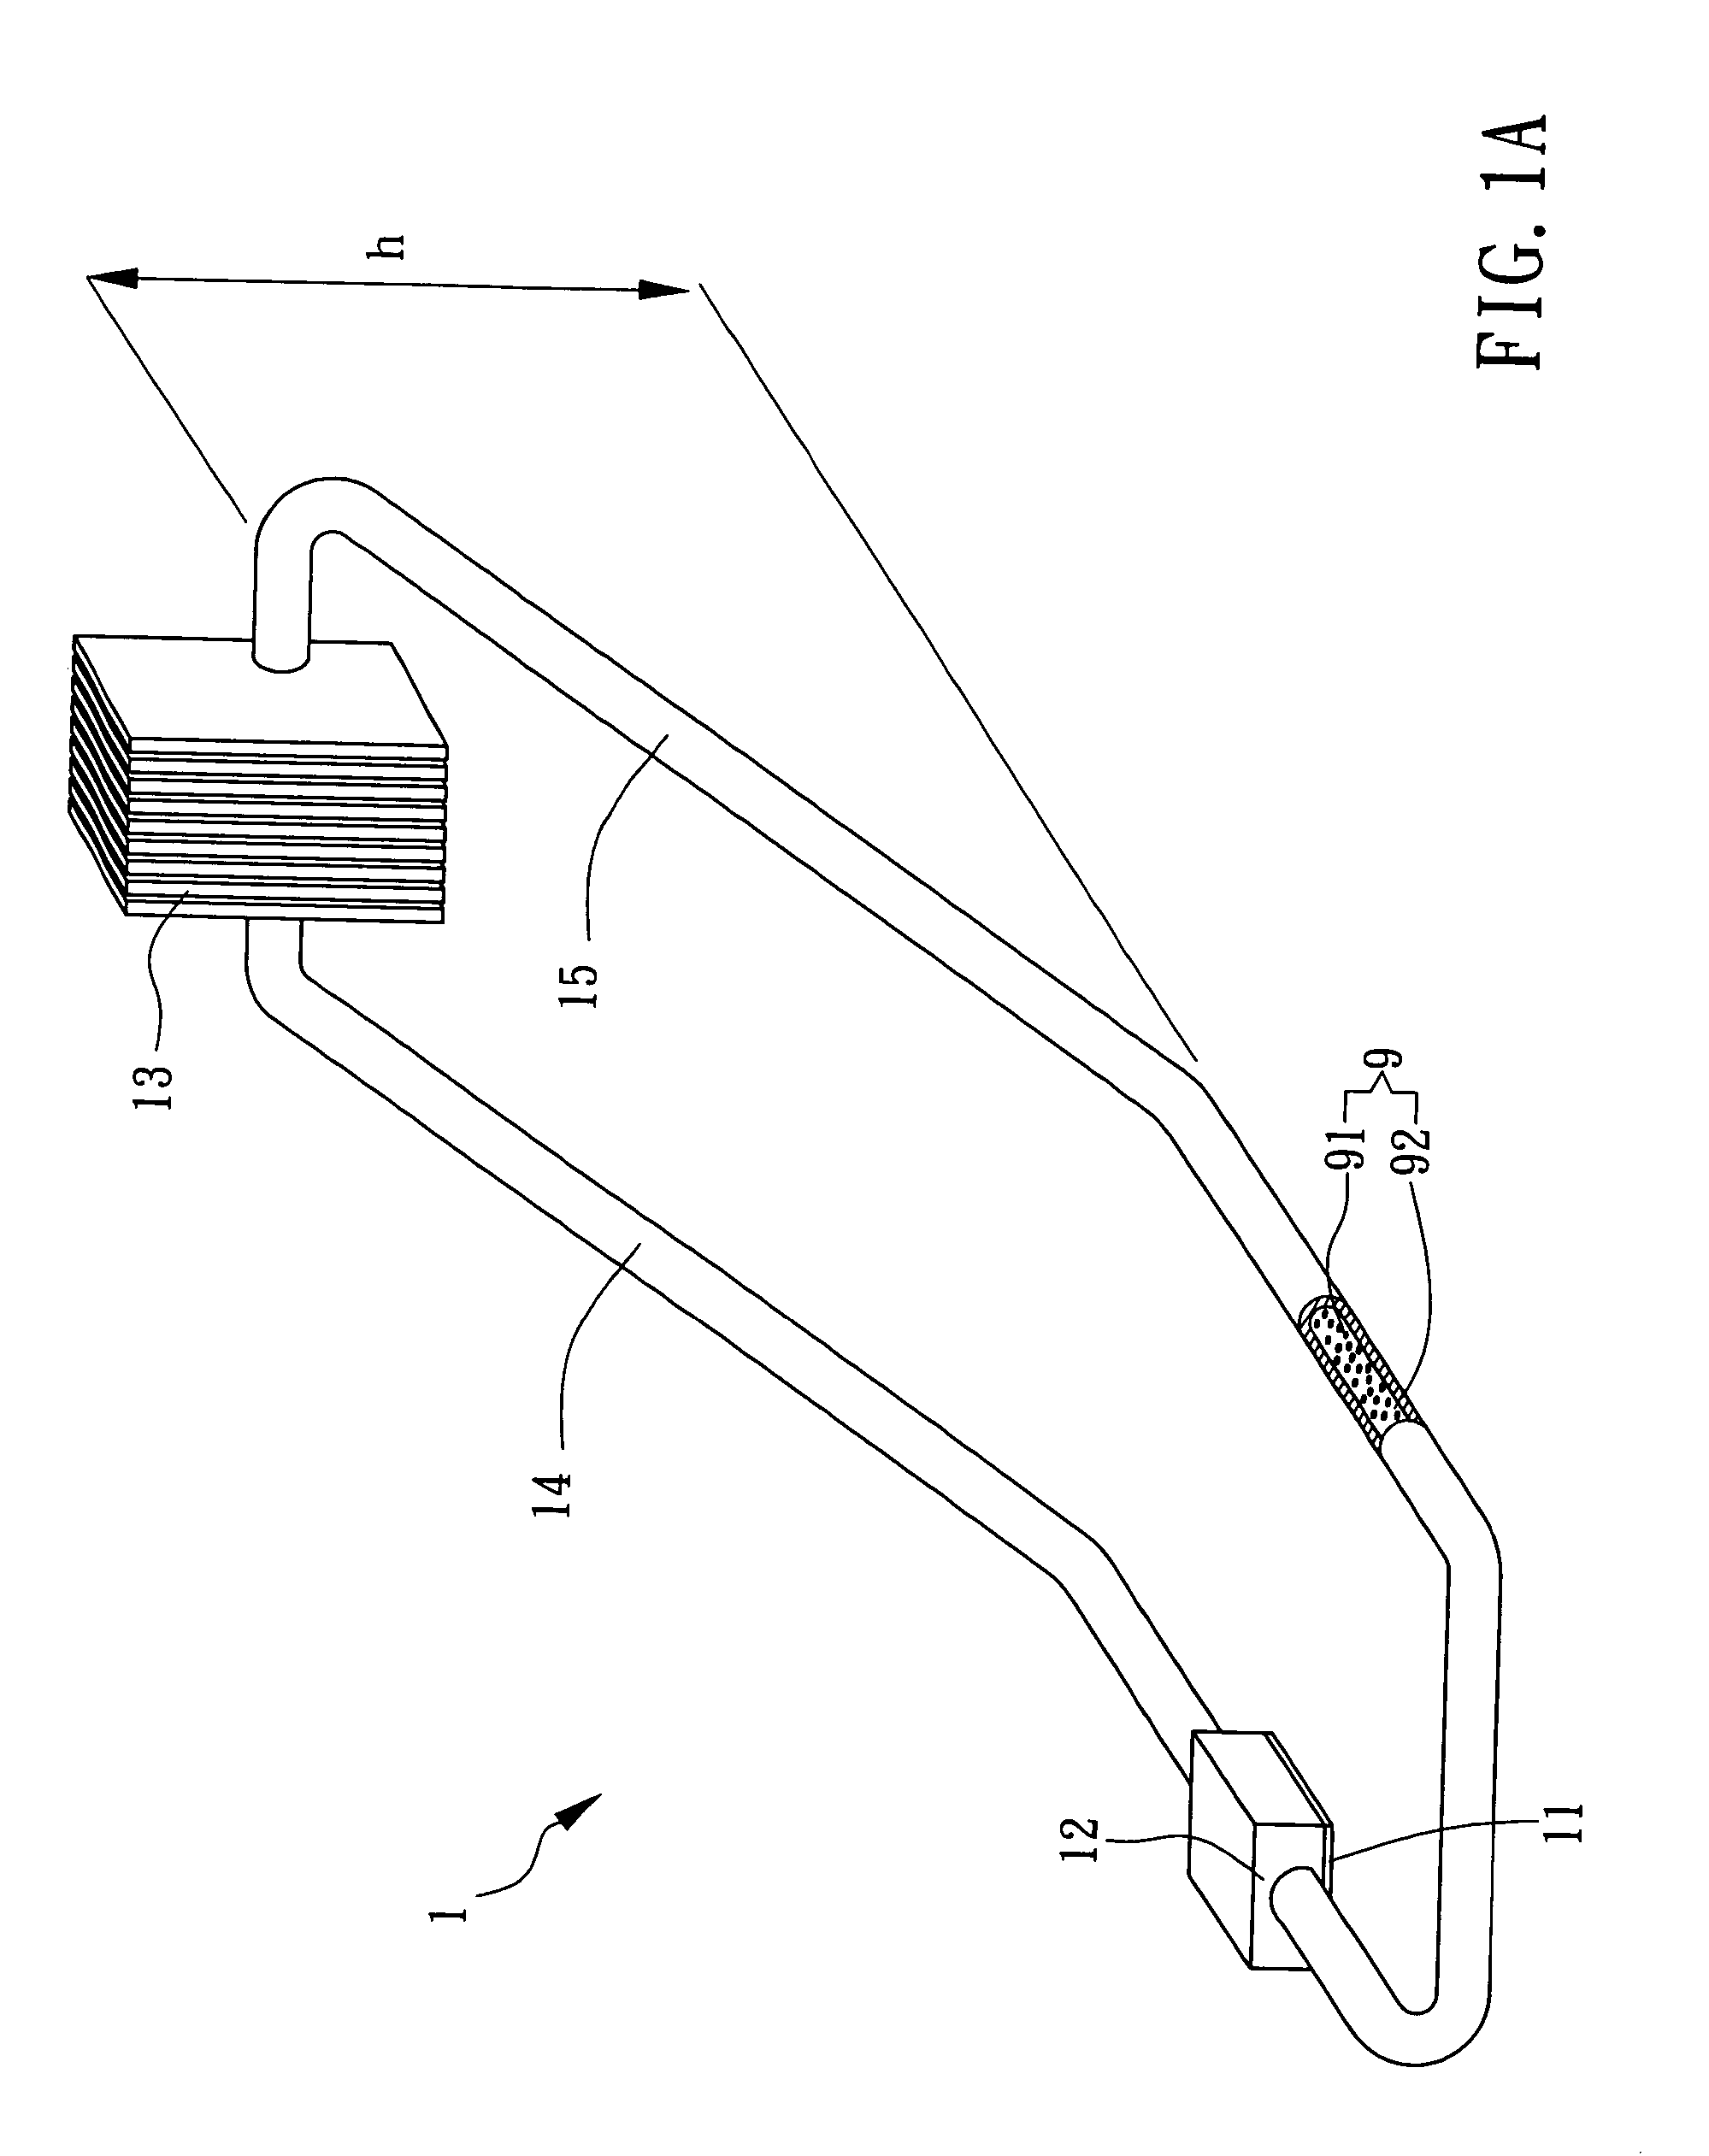 Device of micro loop thermosyphon for ferrofluid power generator